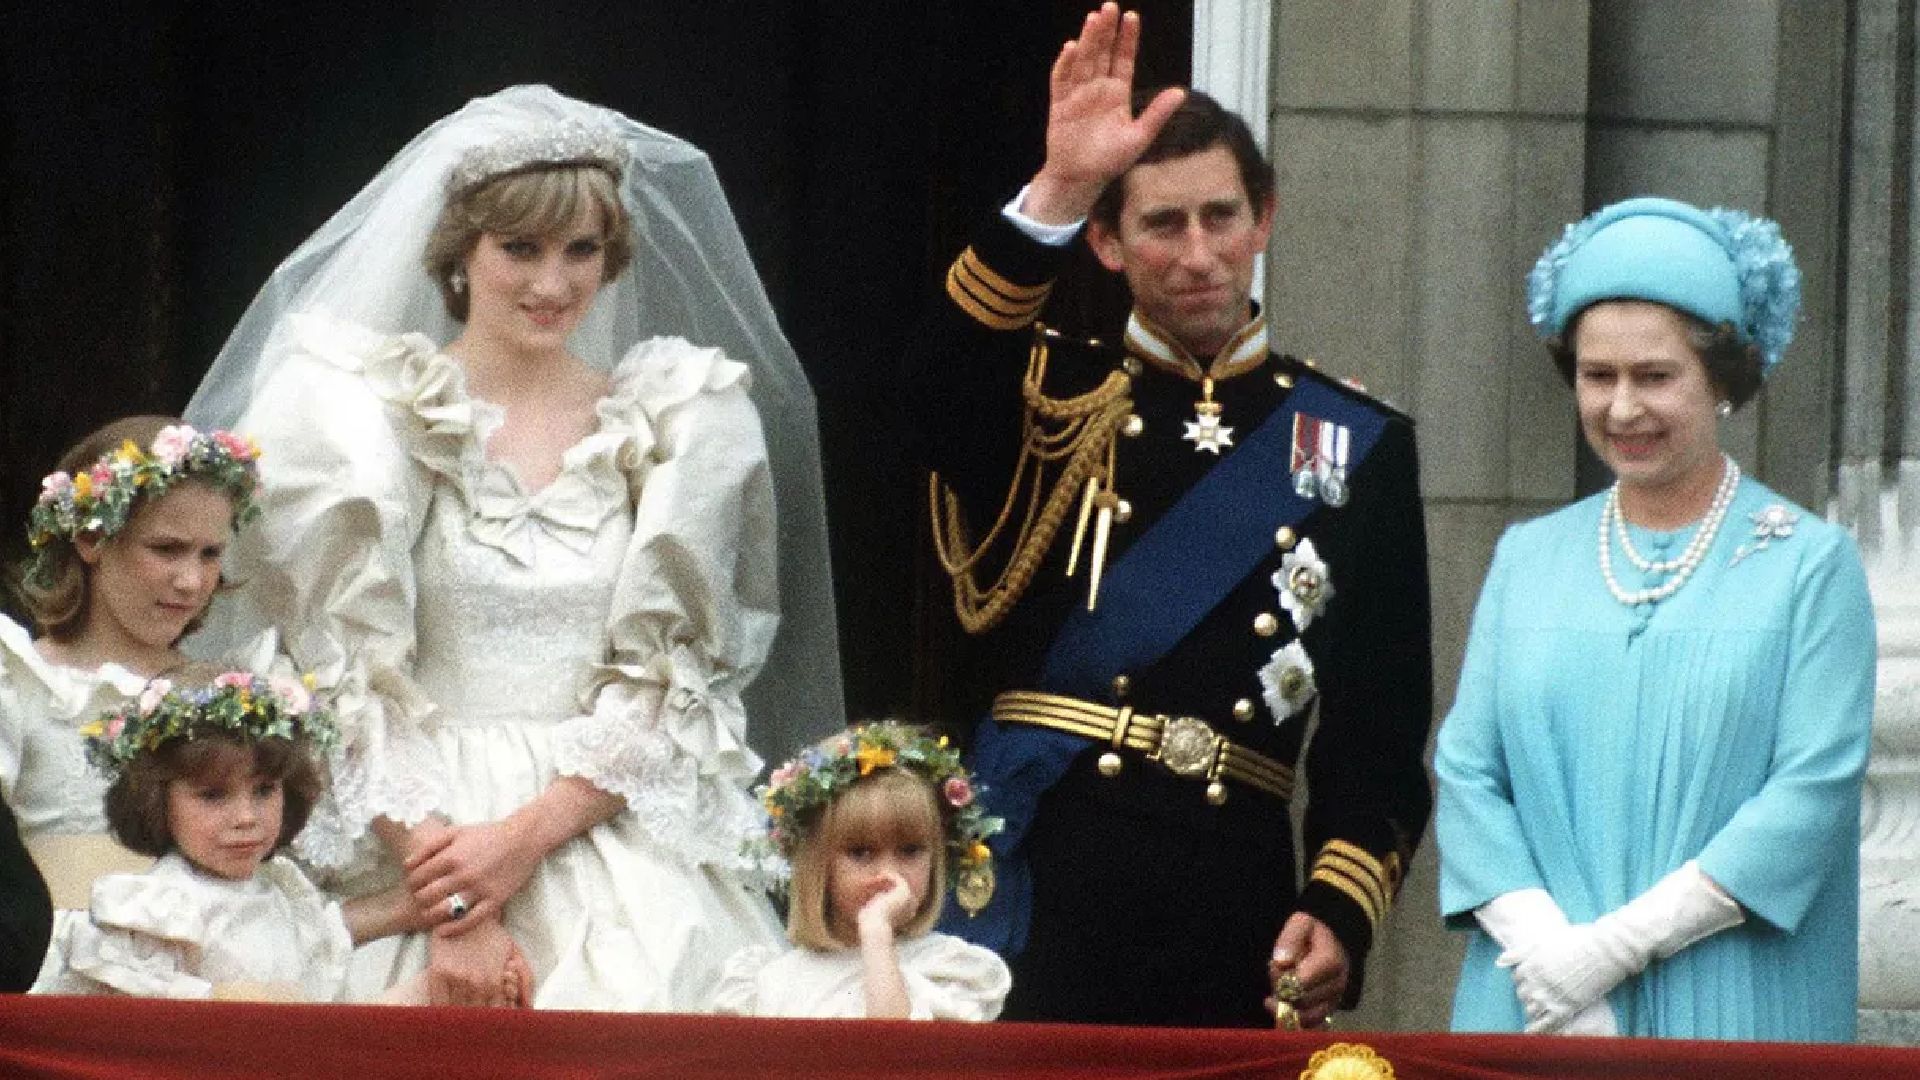 <p>                     Queen Elizabeth was a guest of honour as the then-Prince Charles married Lady Diana Spencer at St Paul’s Cathedral in 1981. Crowds lined the streets to see the newlyweds and Her Majesty, with the Queen opting for a vibrant blue outfit for the momentous occasion. All three waved to the crowds from the balcony of Buckingham Palace in one of the most unmissable moments in royal history.                   </p>